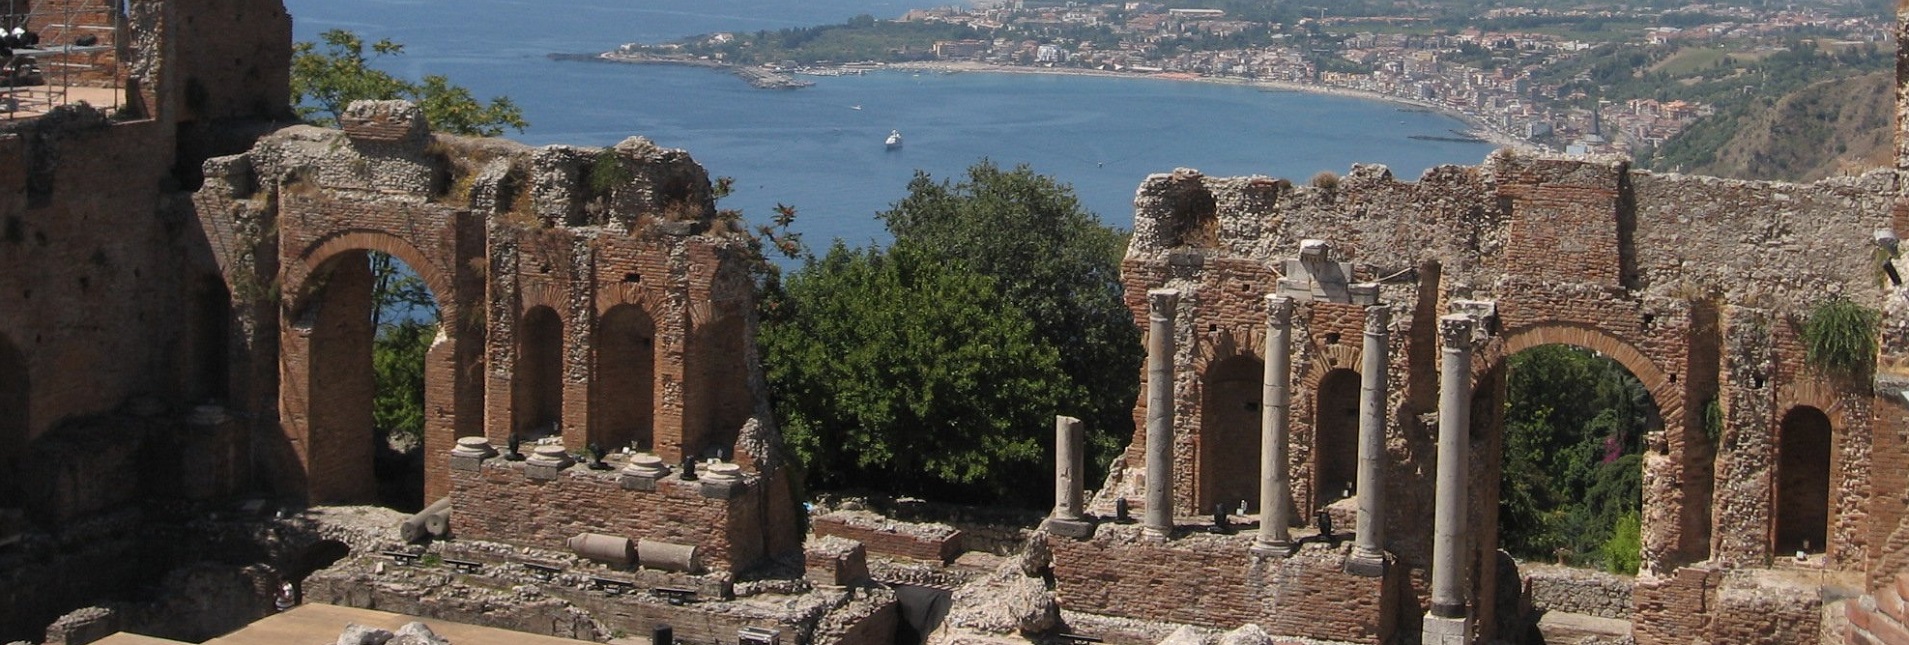 Top 6 Tourist Attractions In Taormina